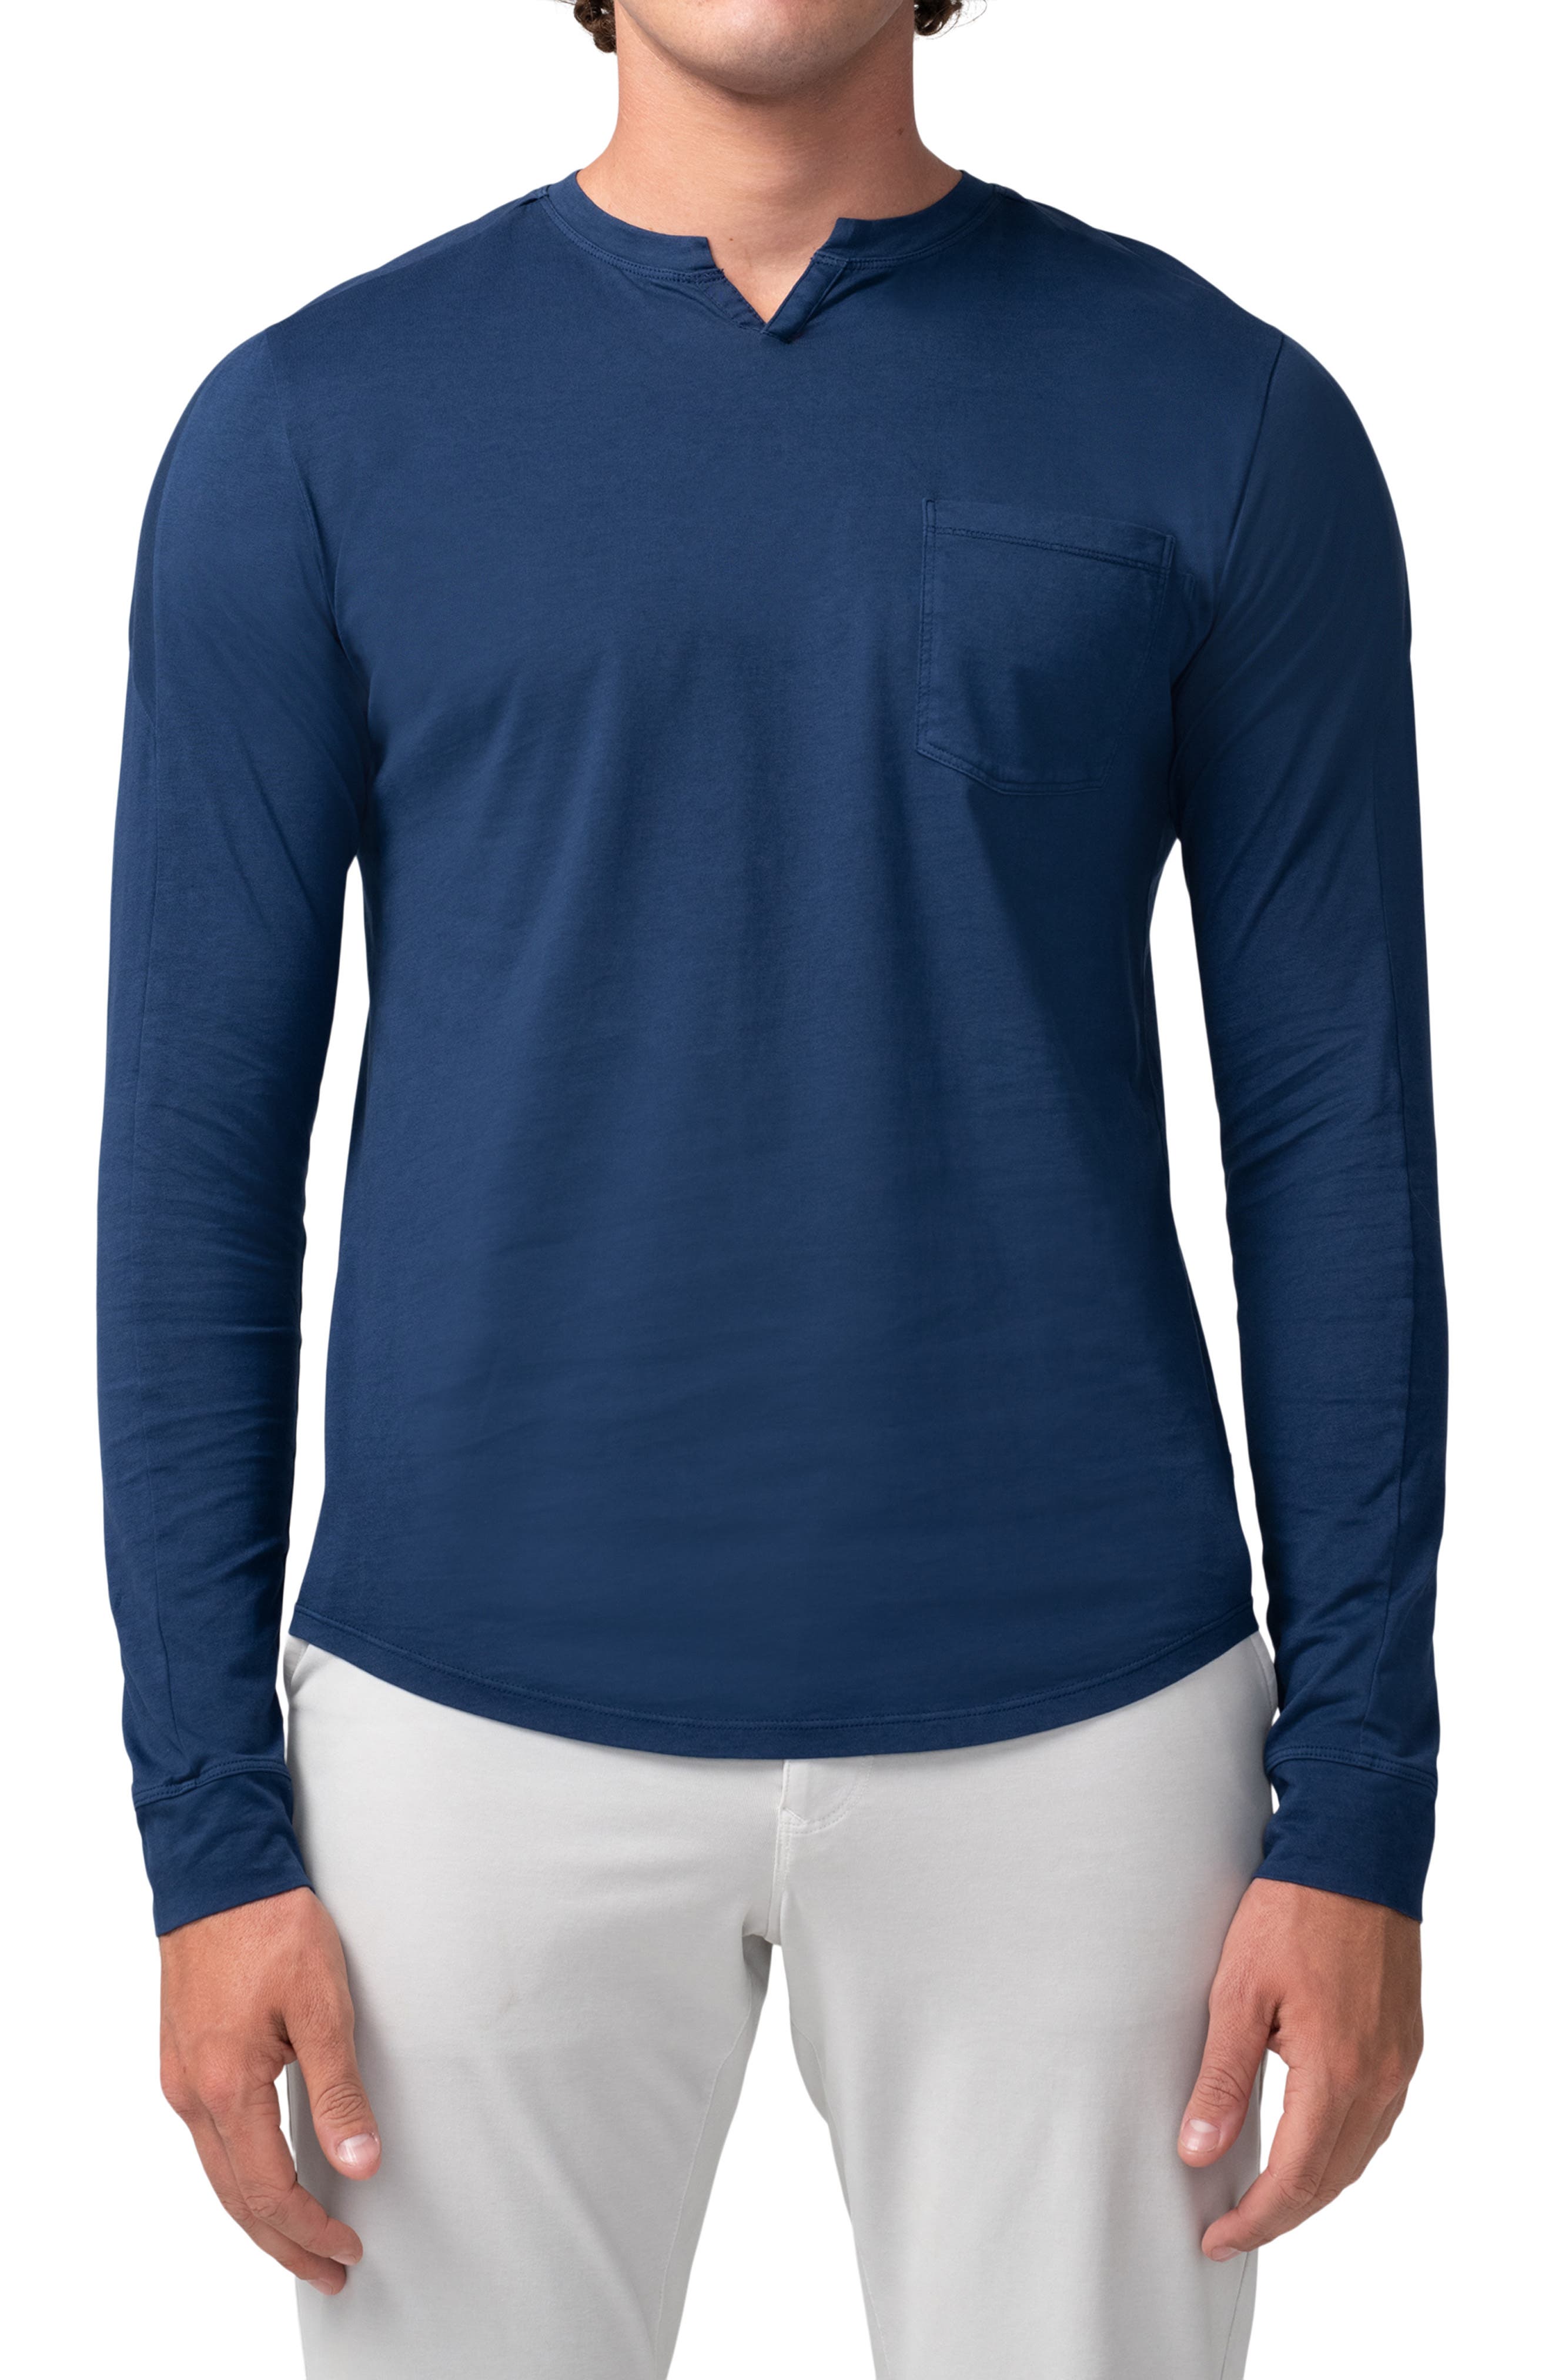 V-Neck 100% Cotton Lower East Long-Sleeved Mens Shirts Pack of 5